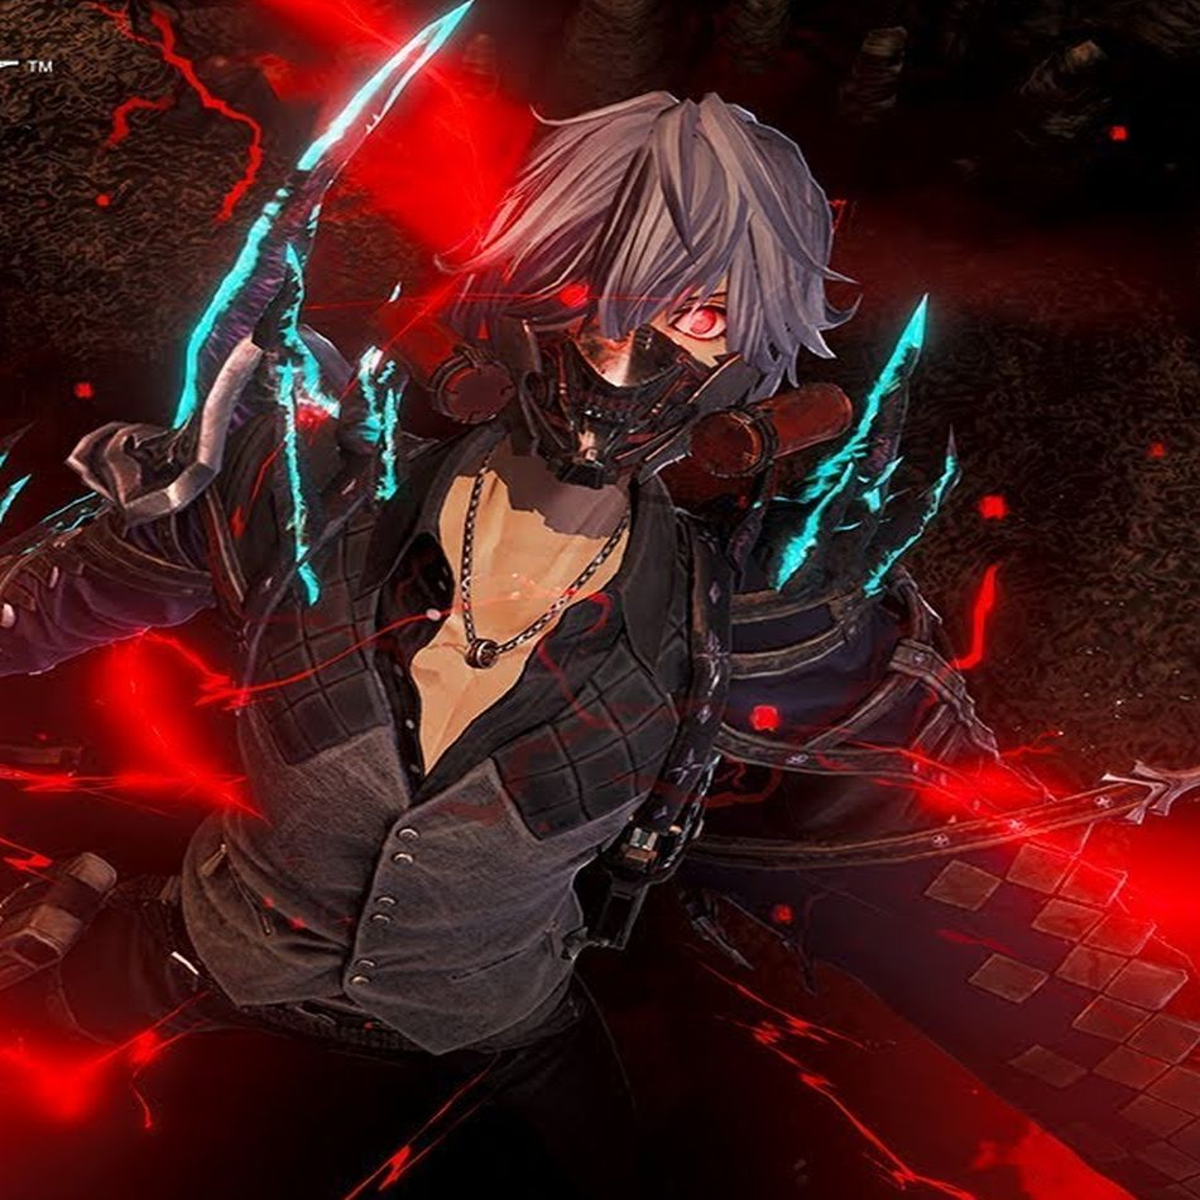 New Code Vein Gameplay Video is a 10 Minute Boss Fight